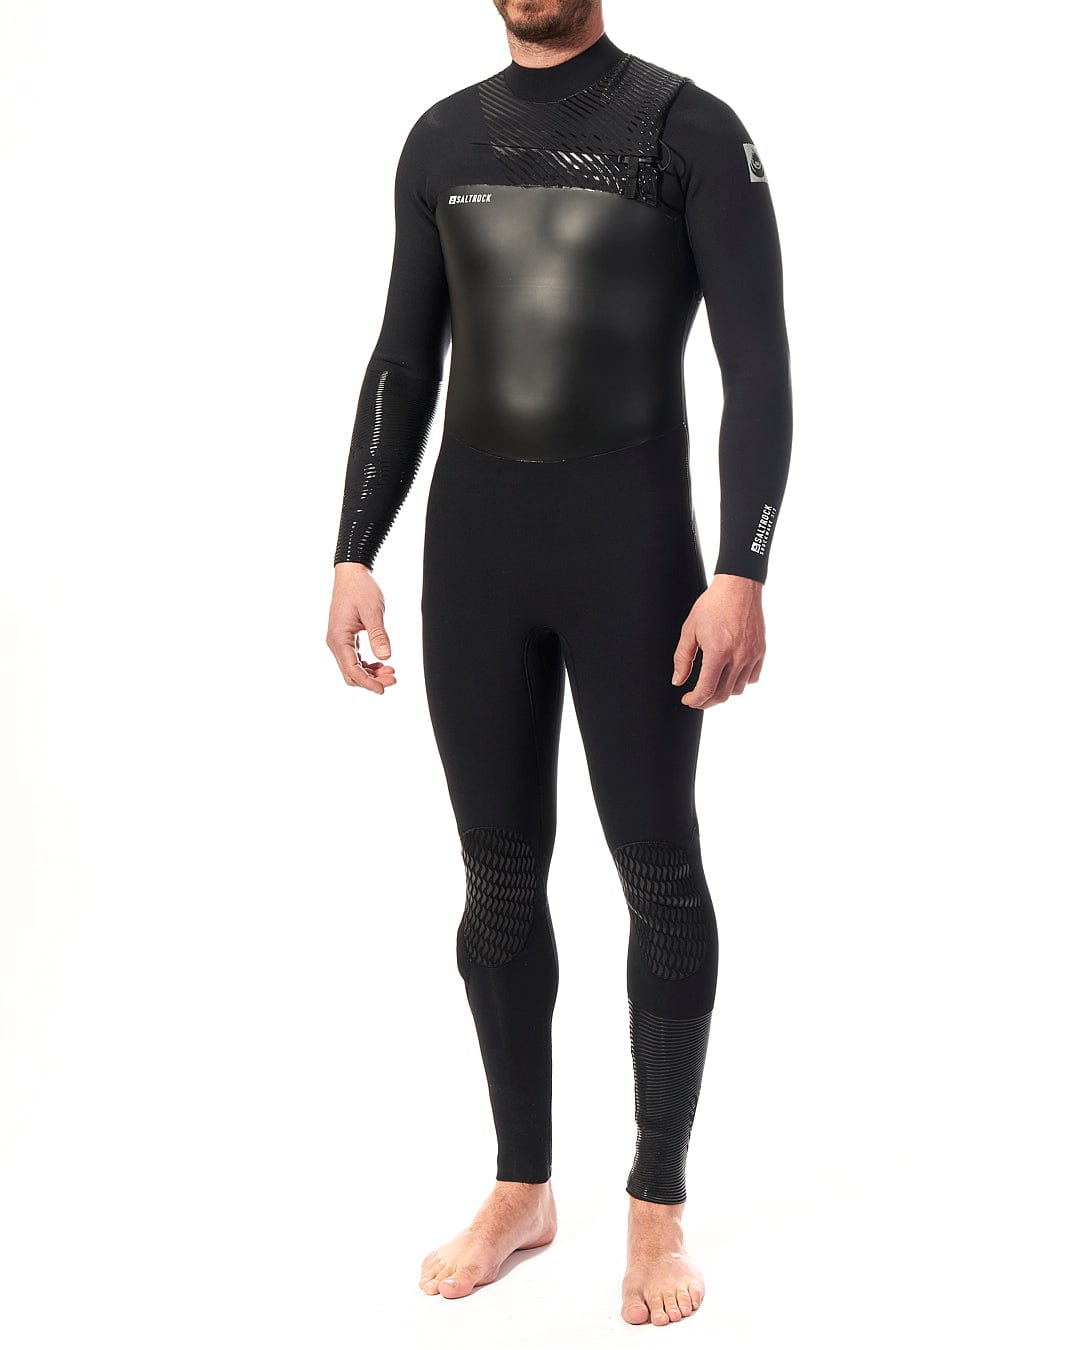 A man in a Saltrock Shockwave - Mens 3/2 Chest Zip Full Wetsuit - Black standing on a white background.